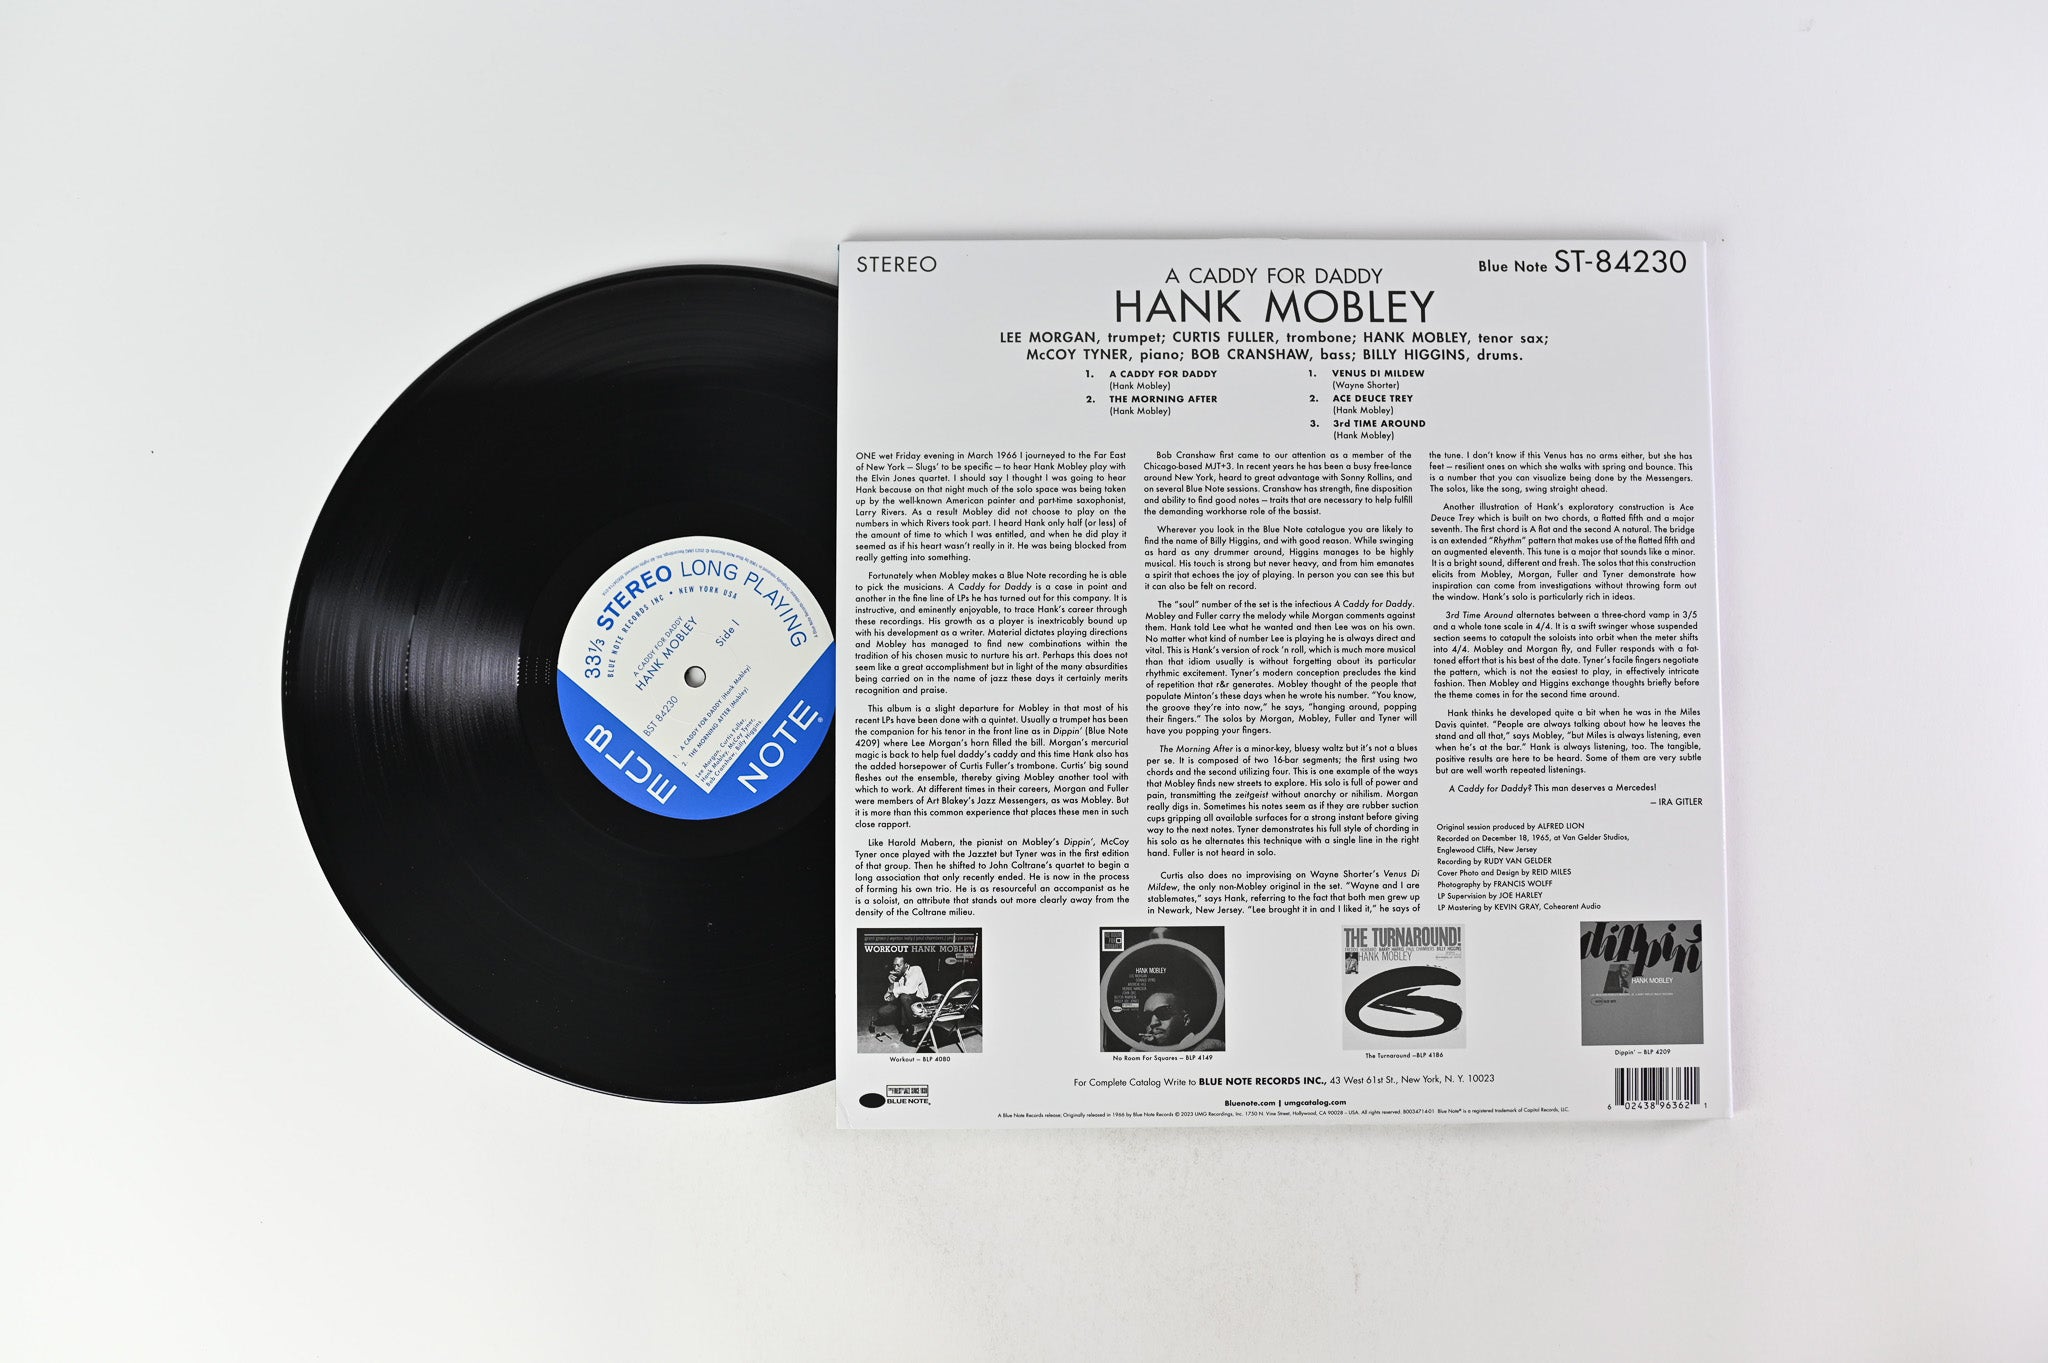 Hank Mobley - A Caddy For Daddy on Blue Note Tonet Poet Series